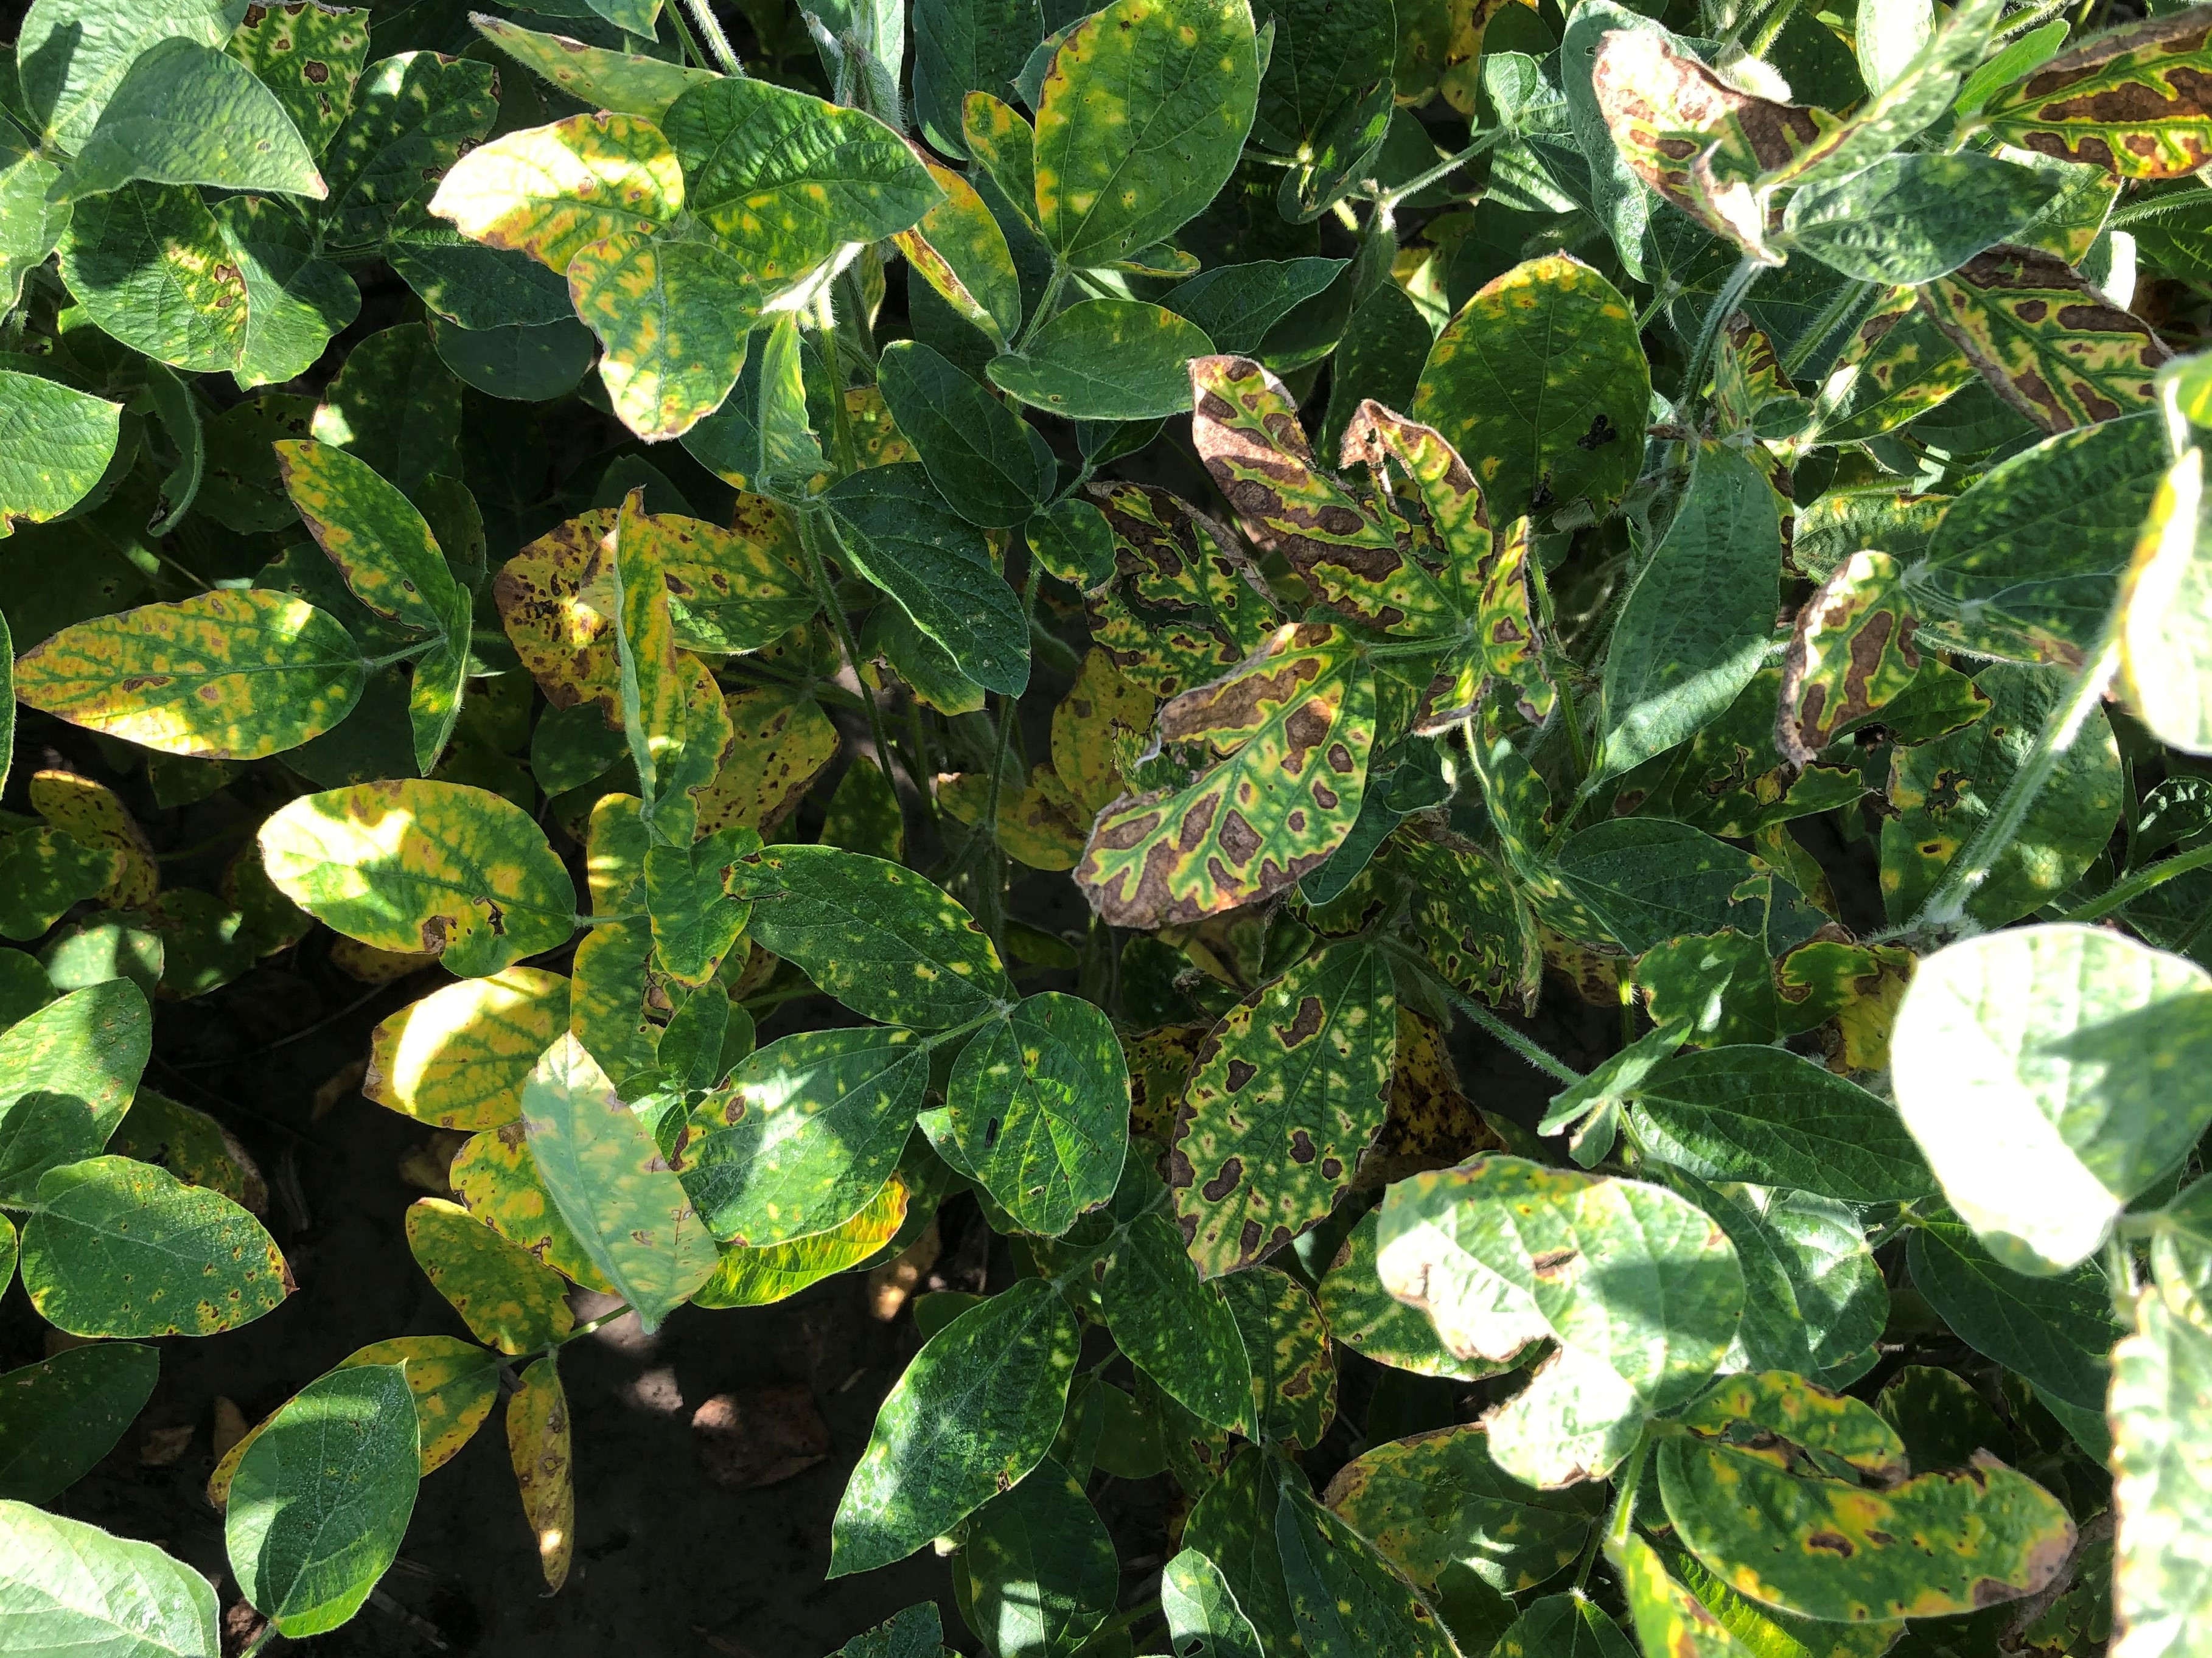 A closeup view of soybean leaves many of which have yellow spots and some that have brown spots as well.